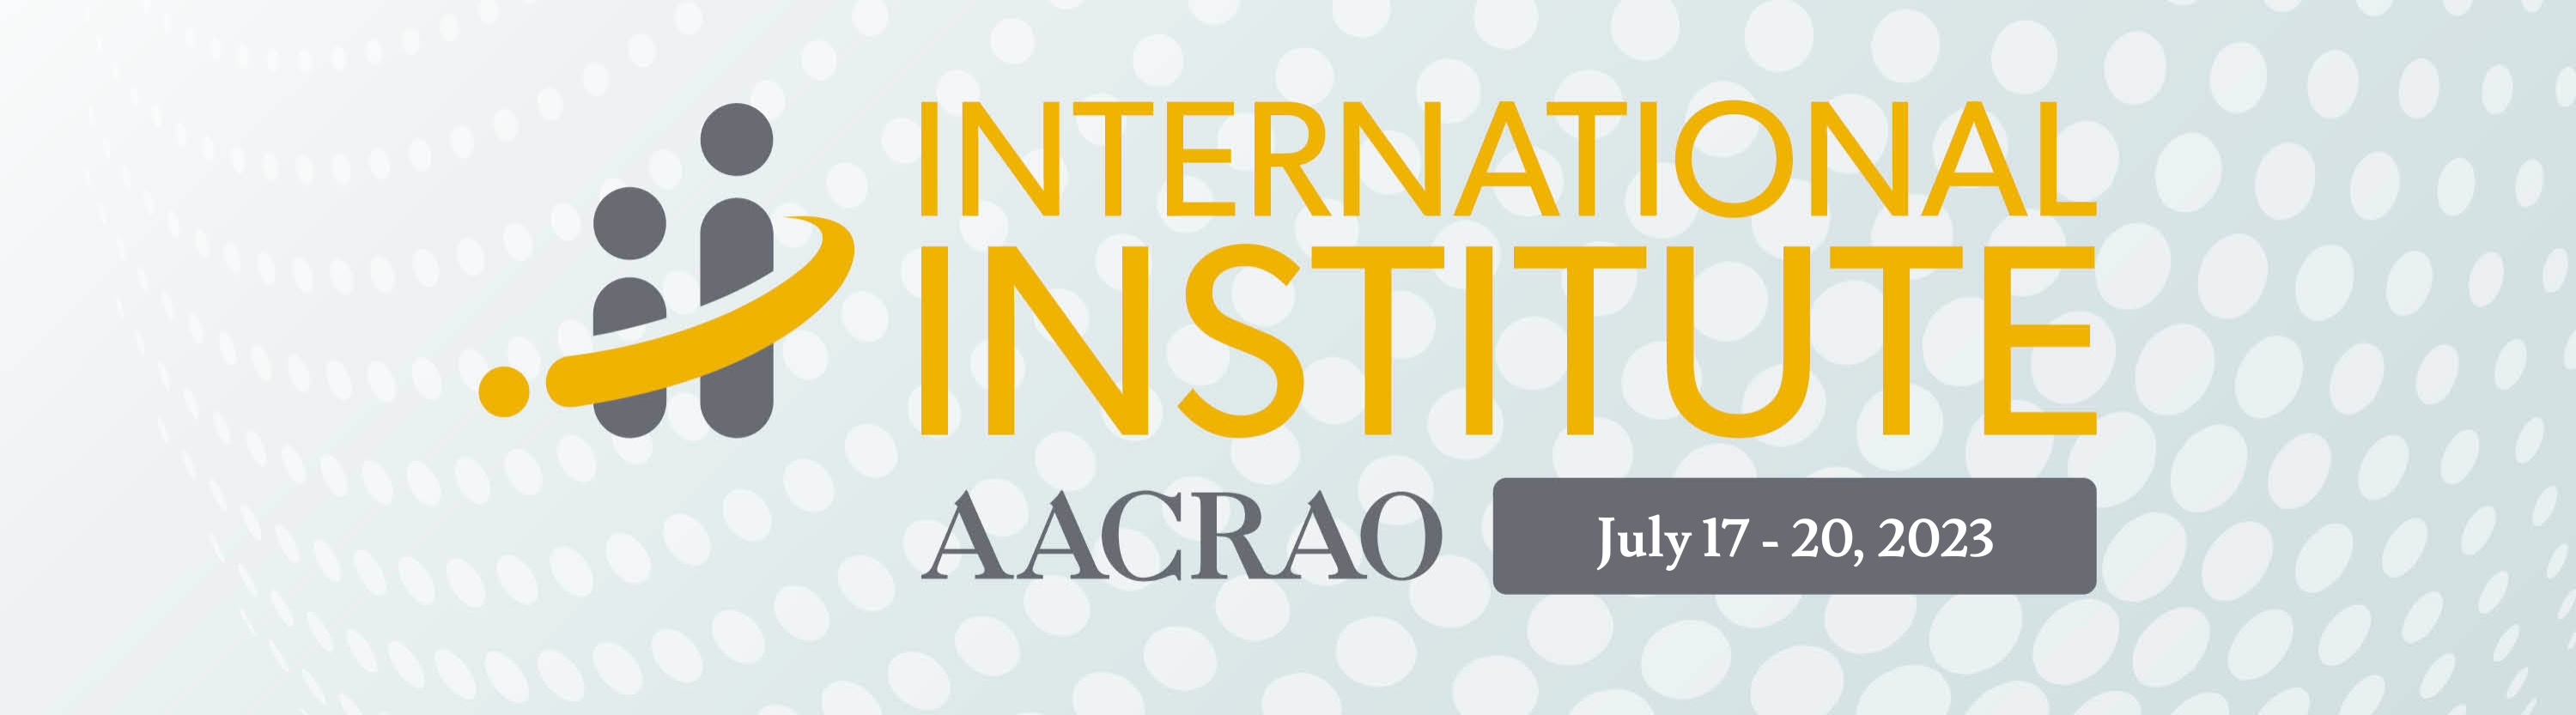 Updated Yellow & Gray International Institute Banner for July